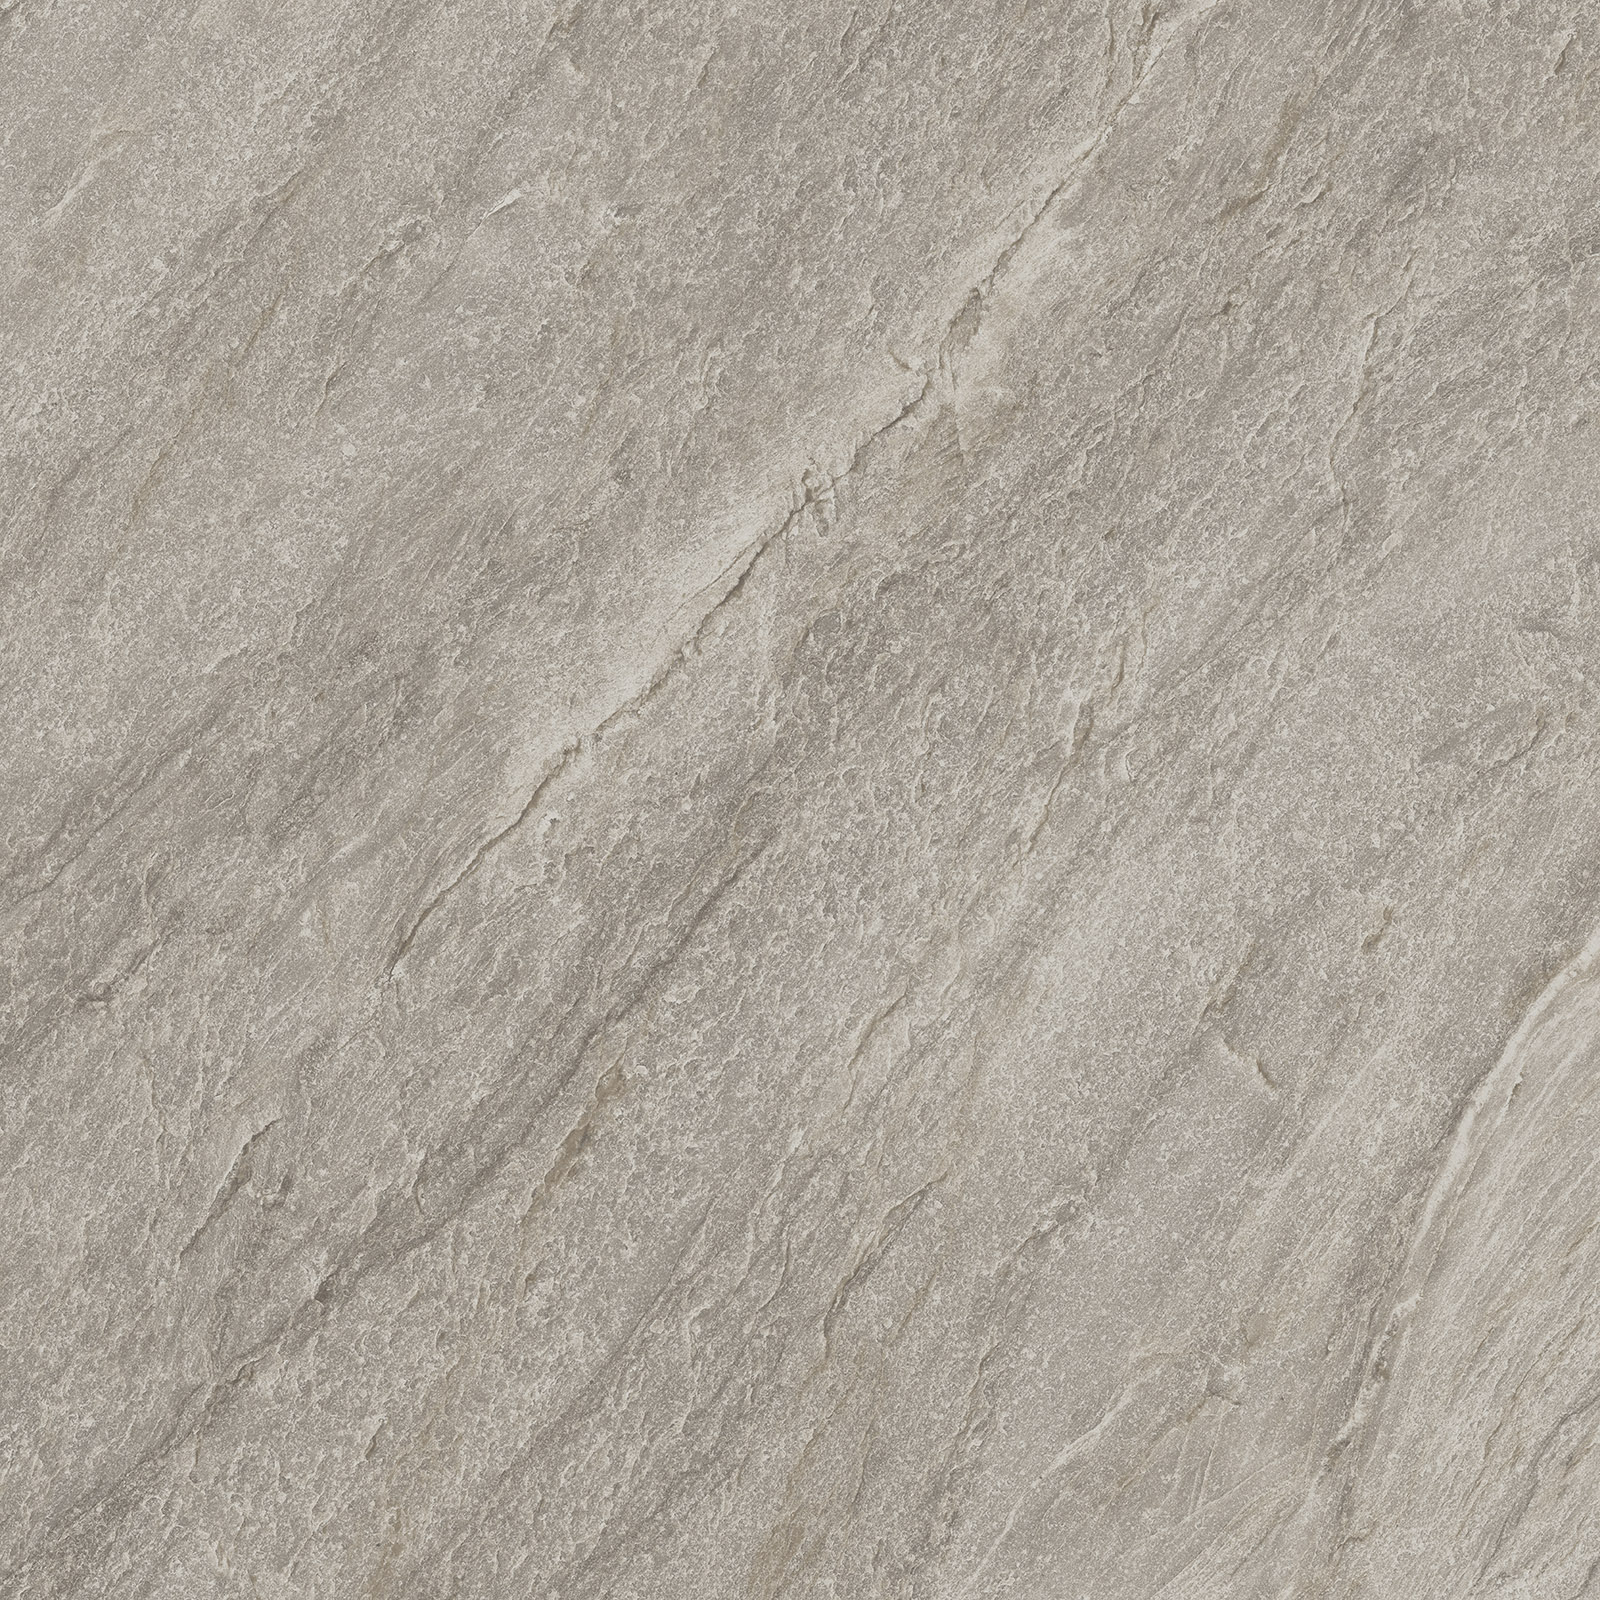 Imola Vibes Beige Scuro Natural Strutturato Matt 179401 90x90cm rectified 10mm - VIBES 90BS RM